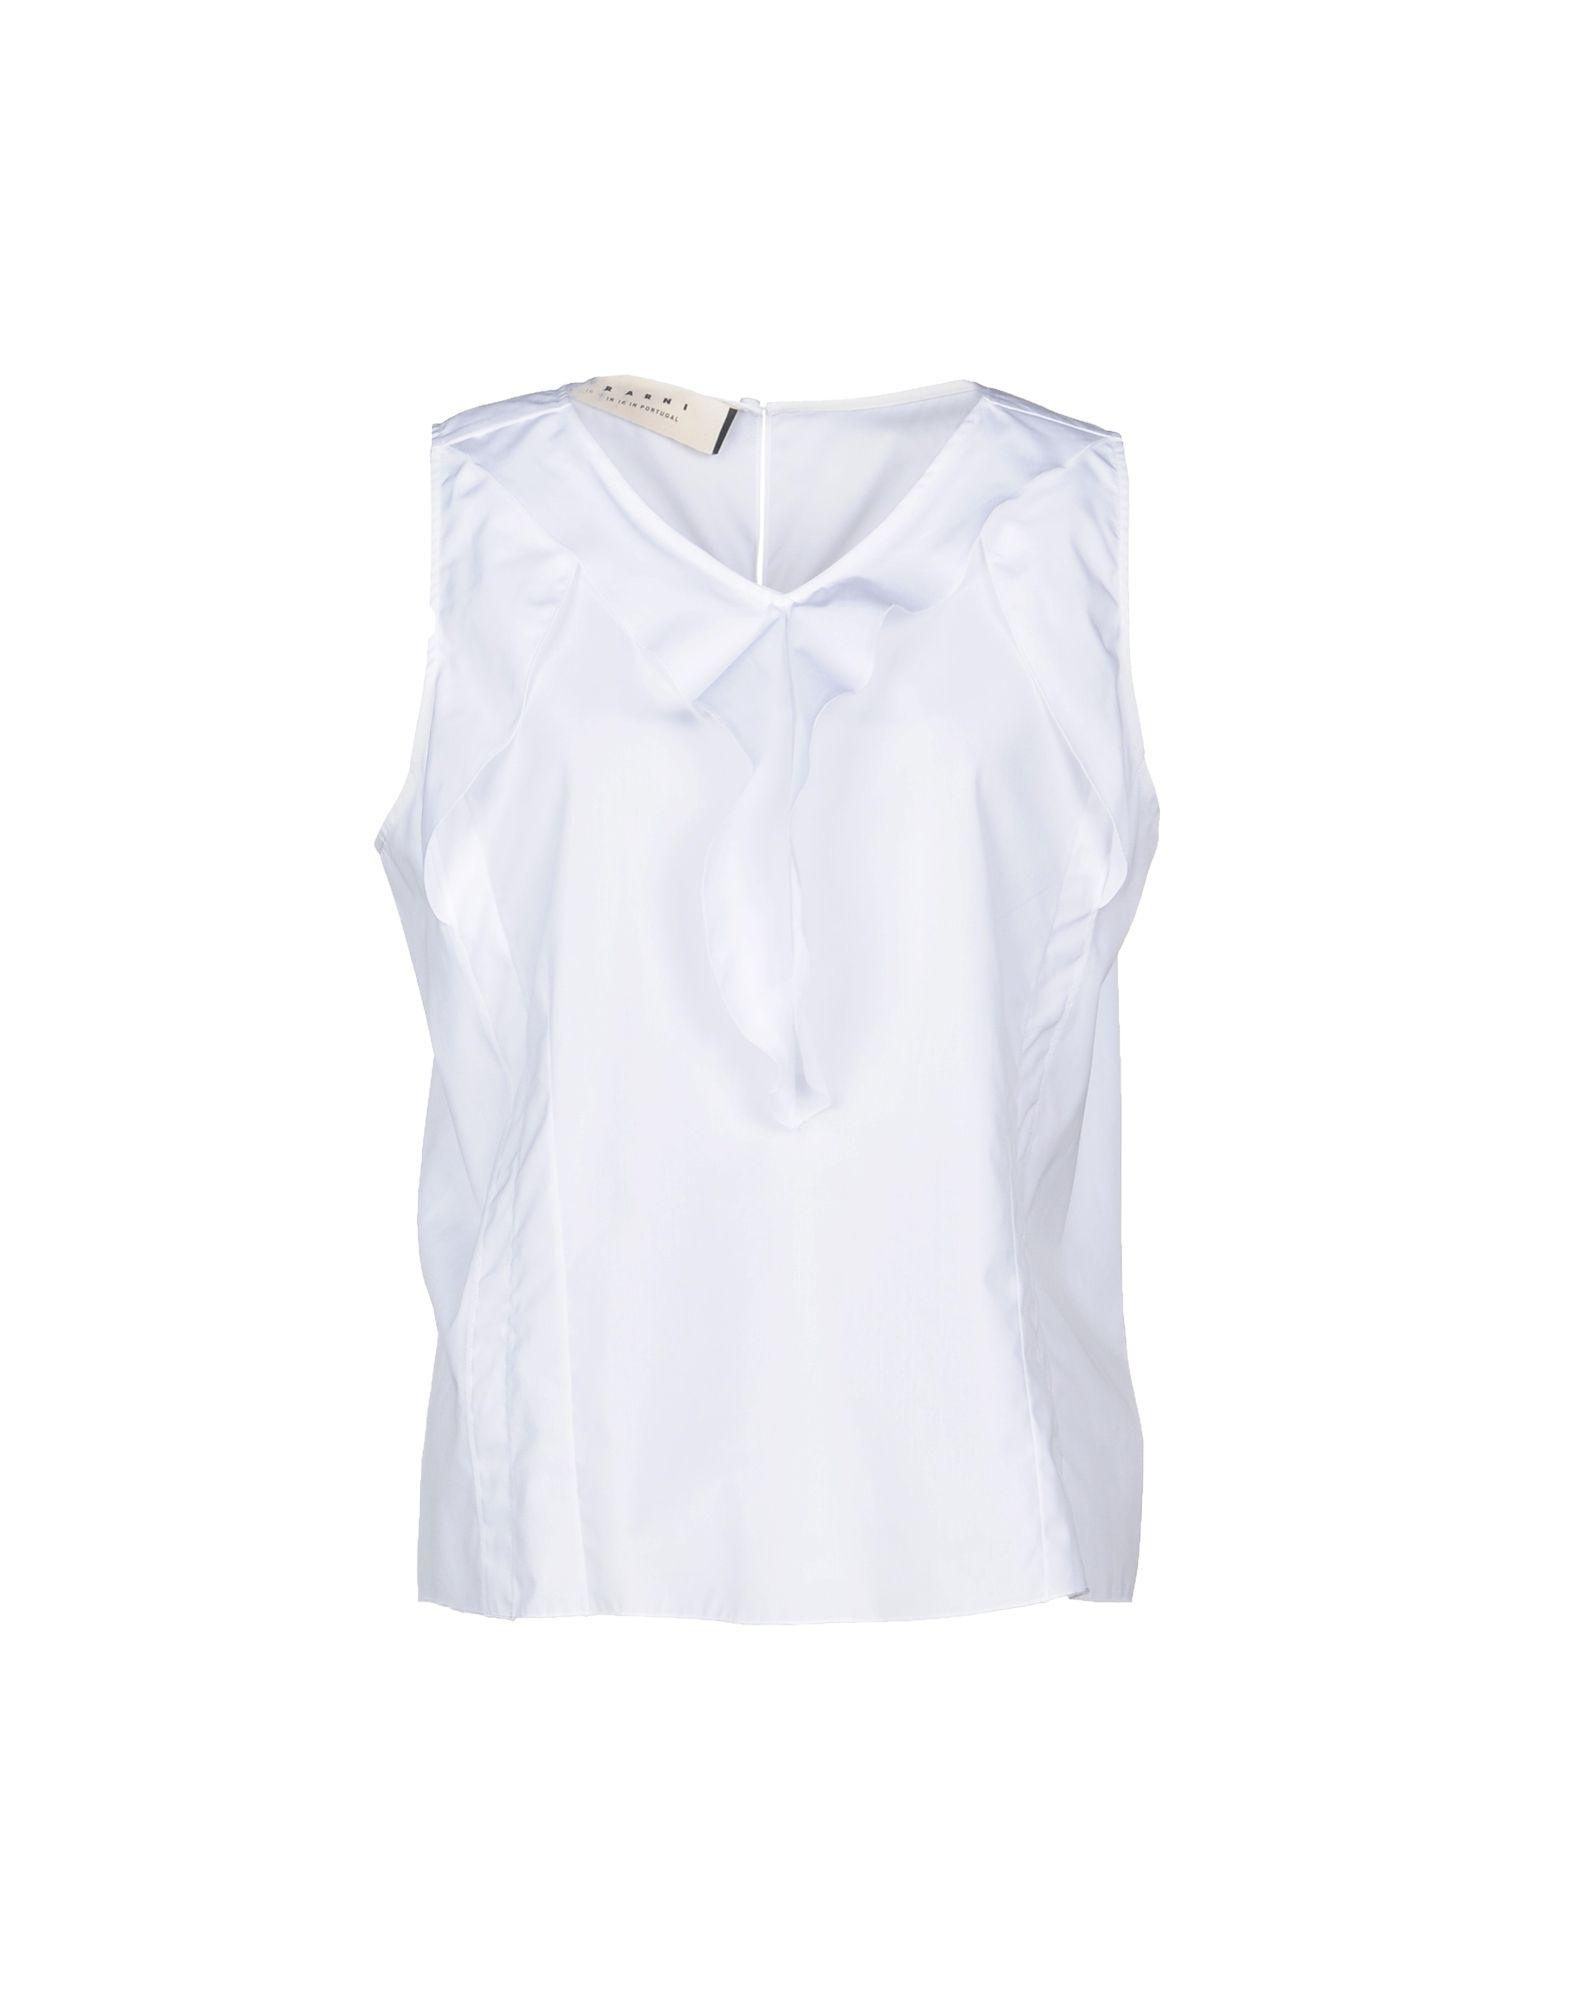 Marni Top in White - Lyst